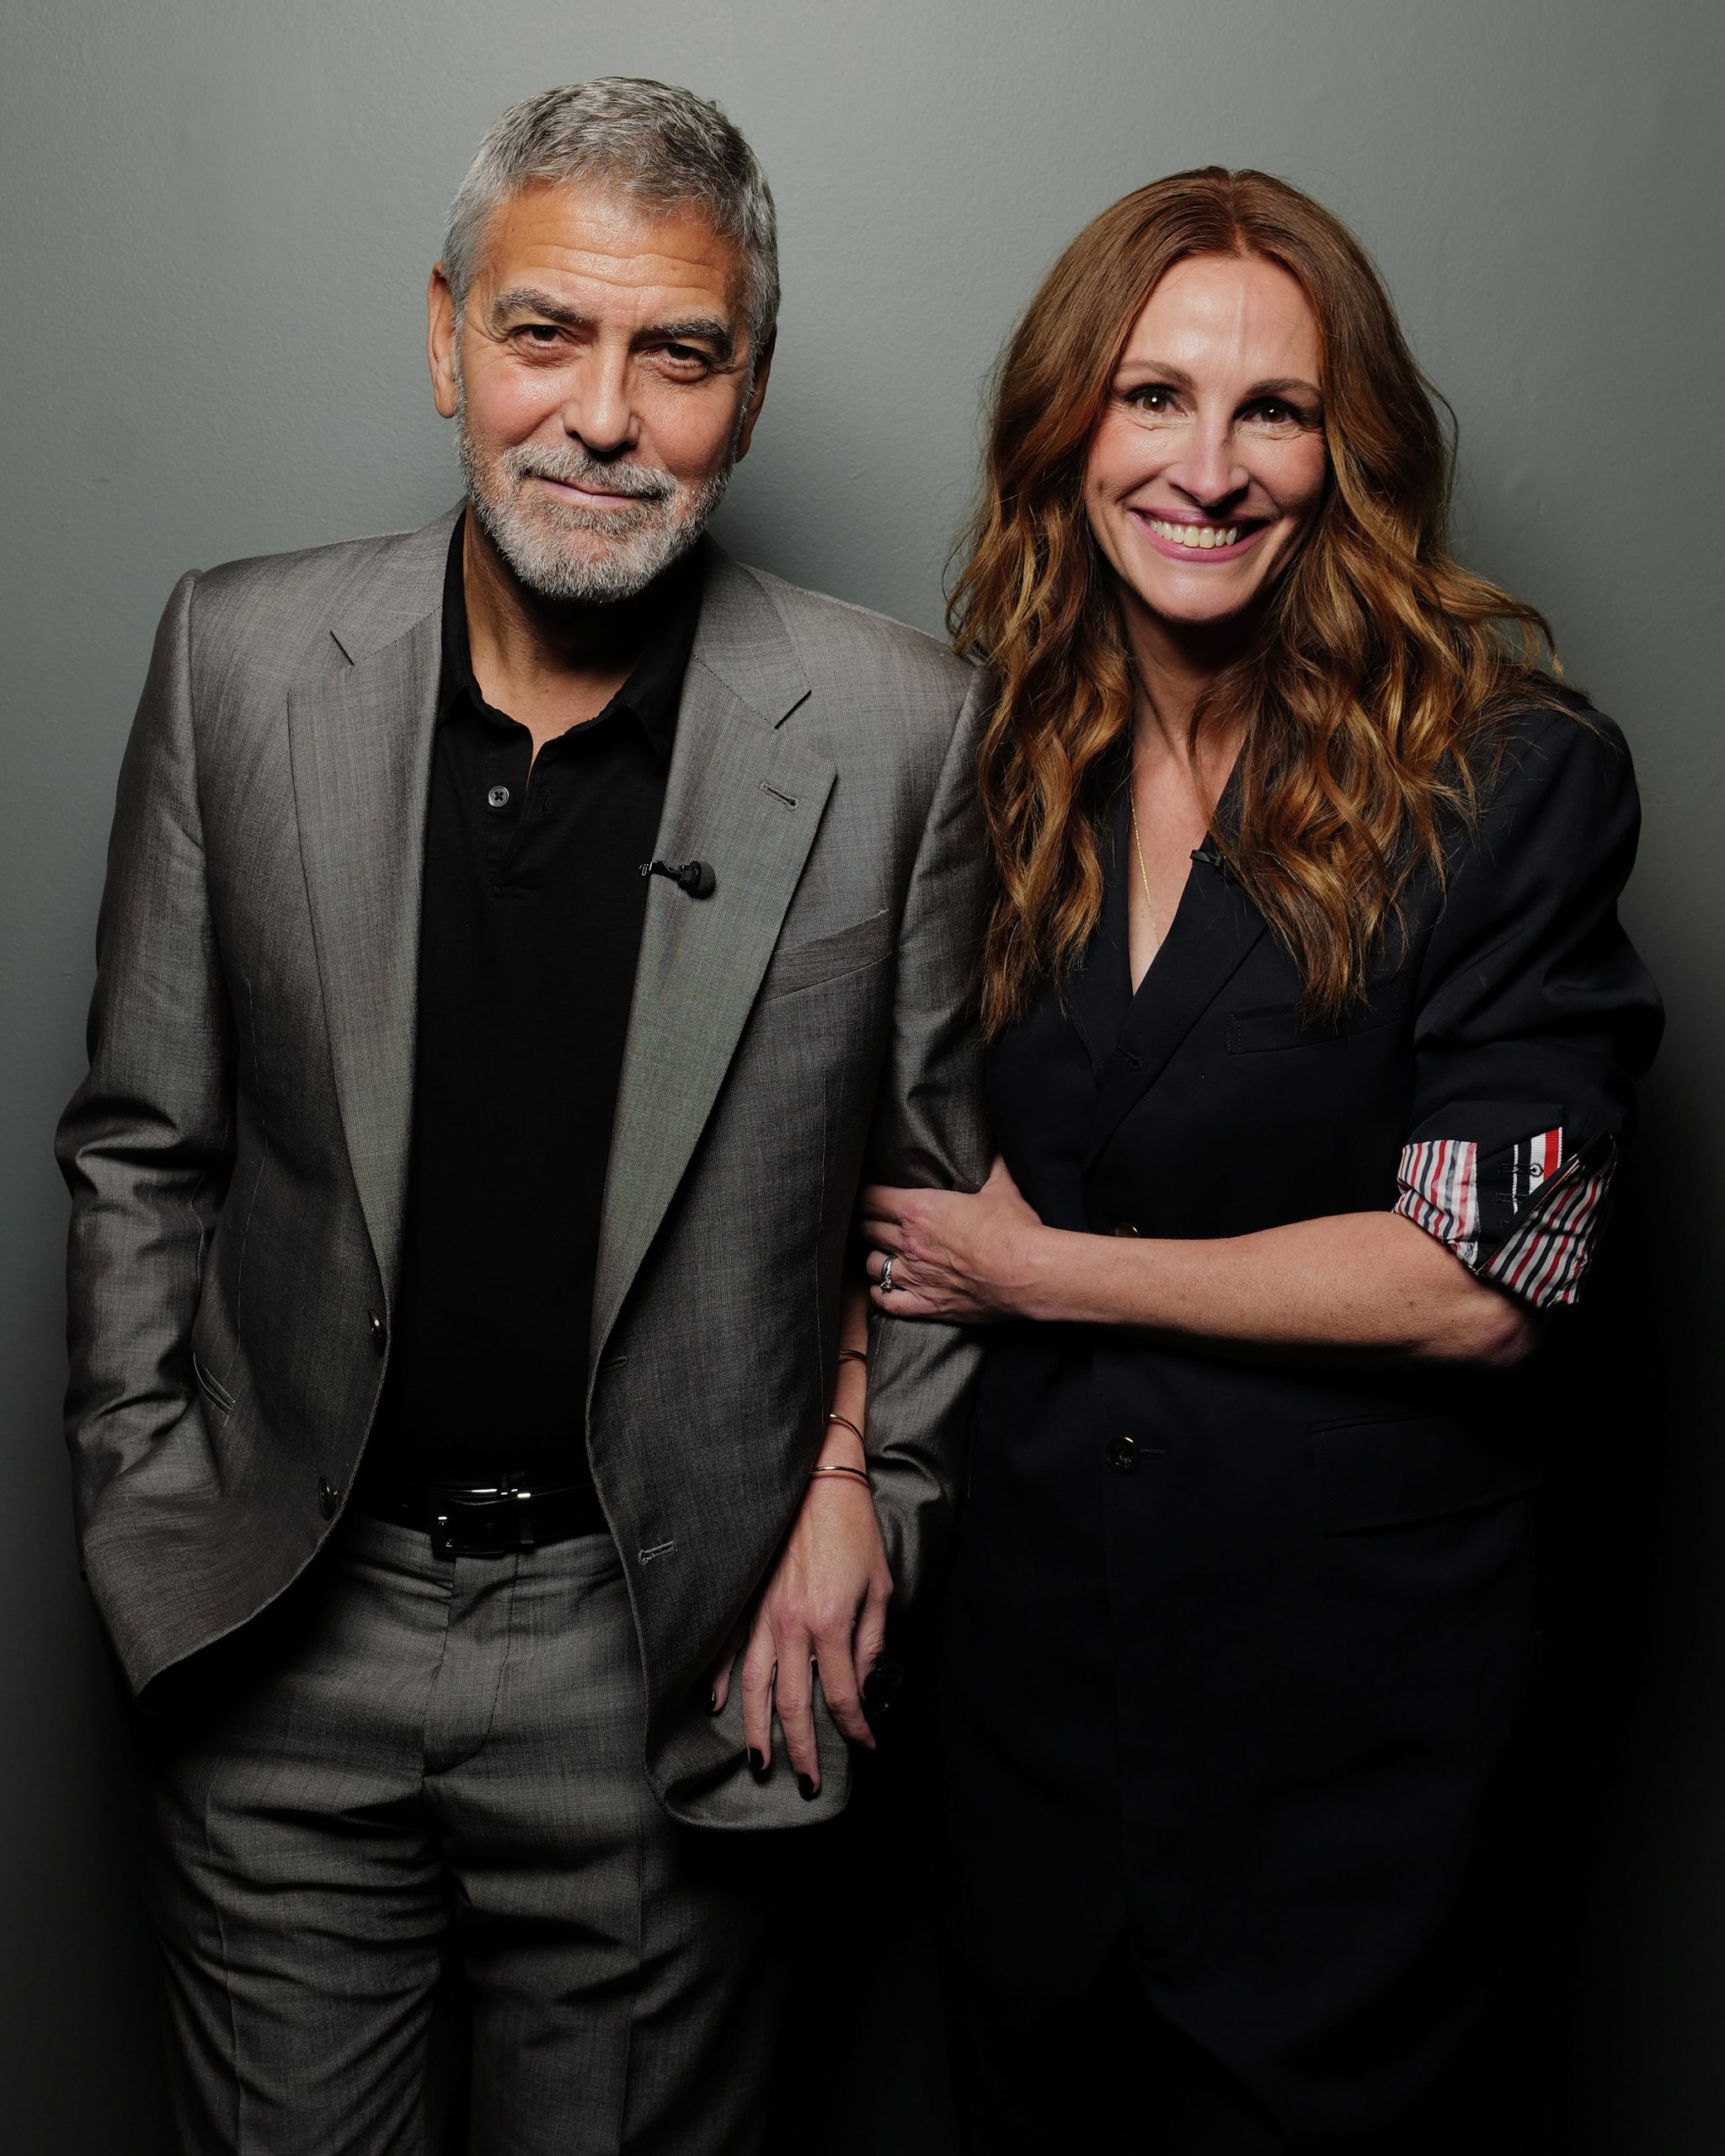 In Case You Missed It: George Clooney & Julia Roberts On ‘Jimmy Kimmel Live’